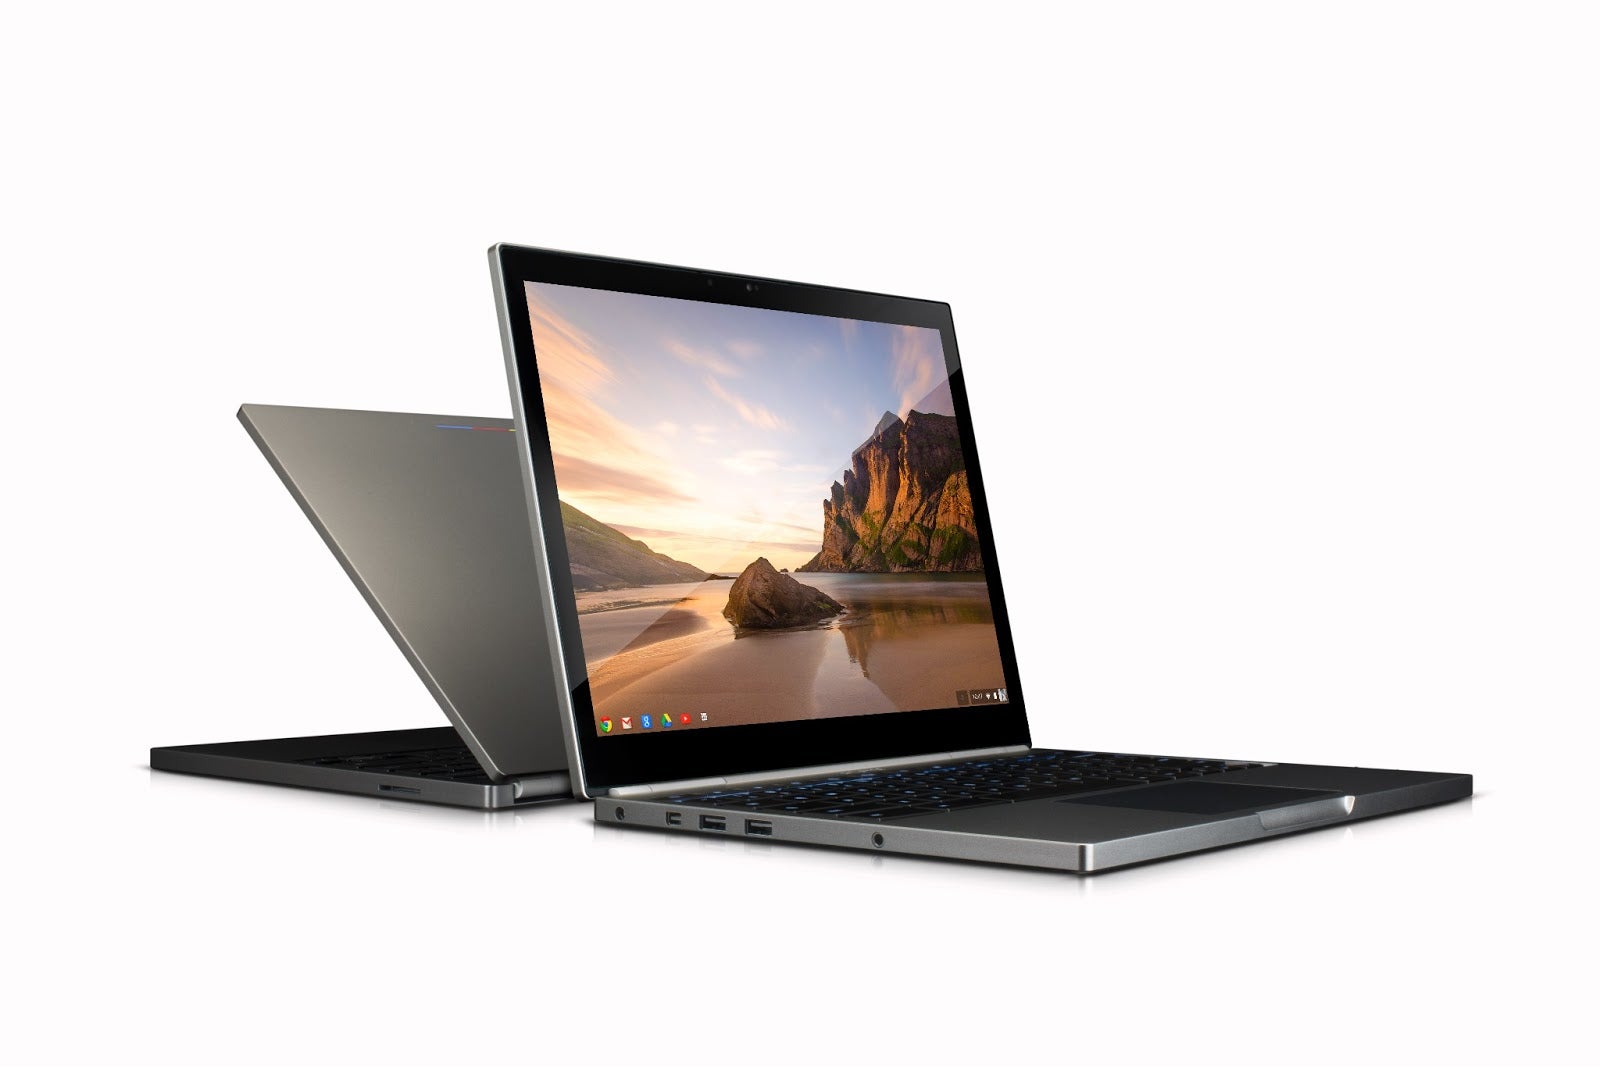 The Chromebook Pixel is Google's own hardware offering that runs the Chrome operating system